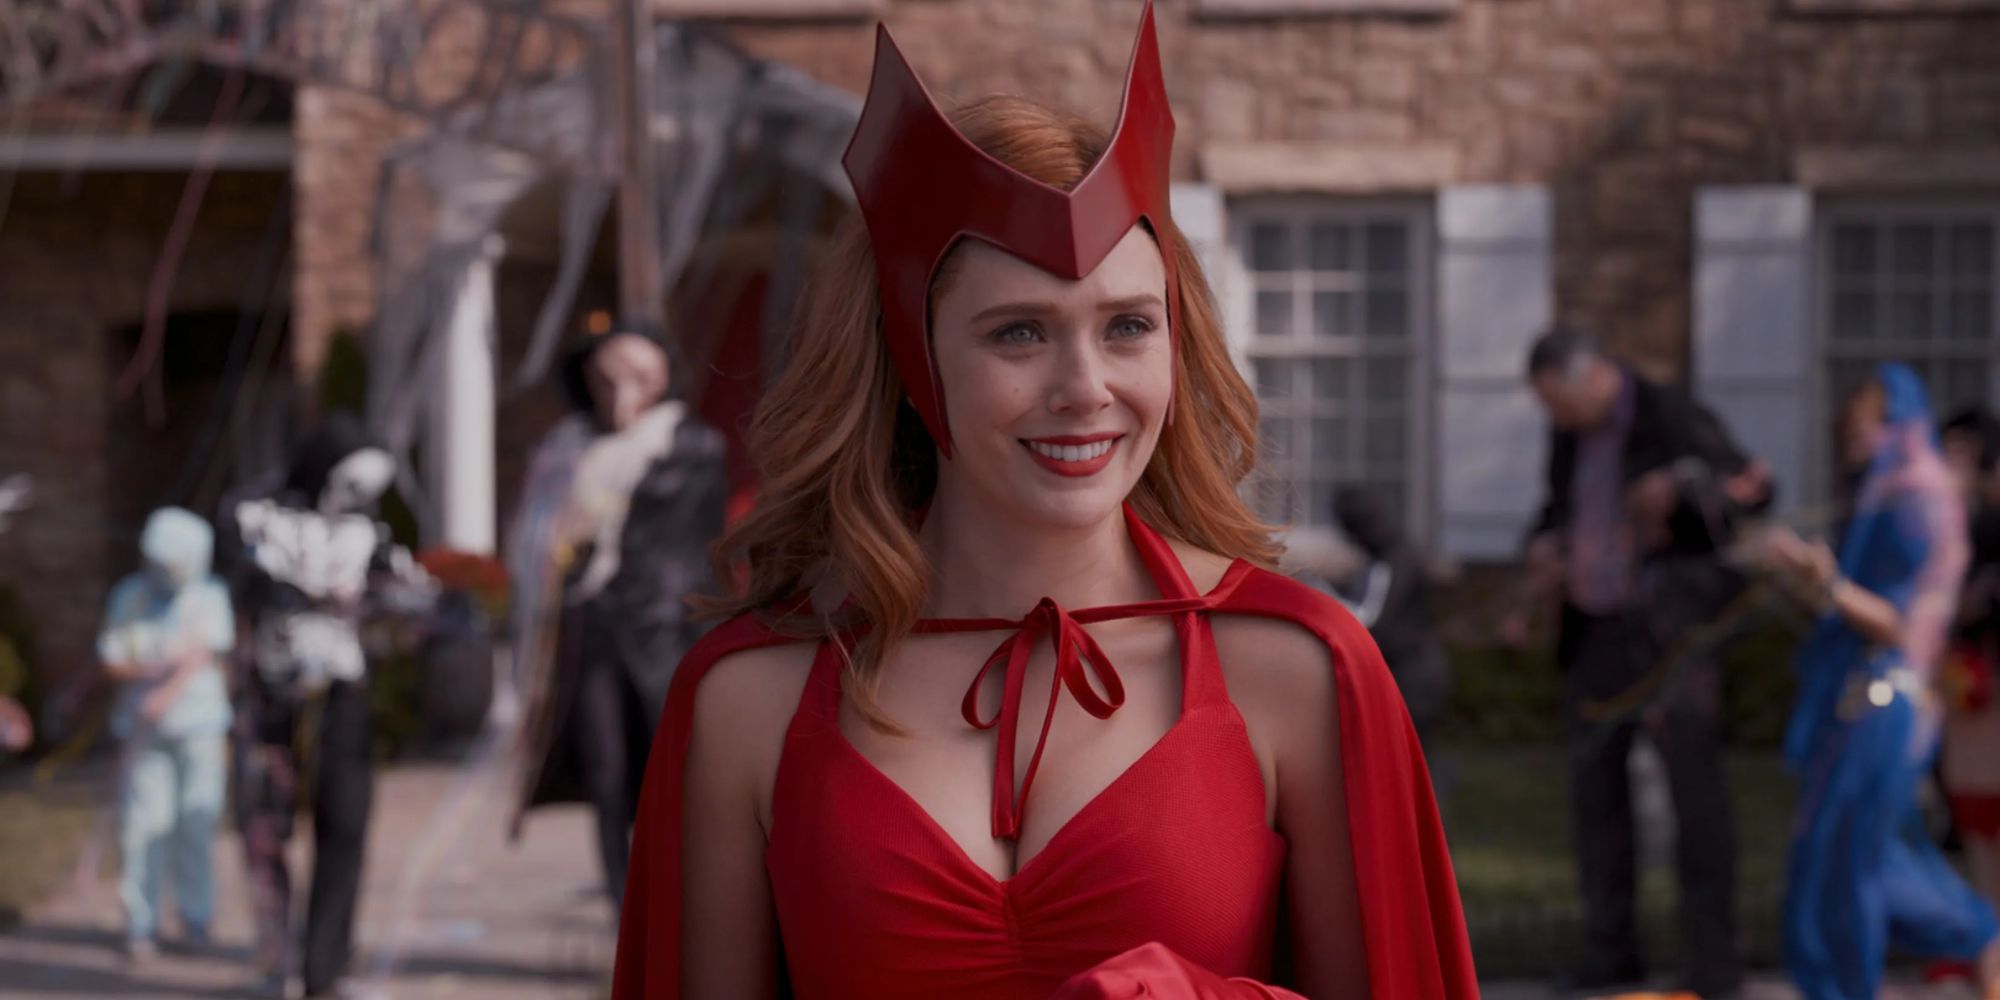 Wanda Maximoff in her classic Scarlet Witch costume